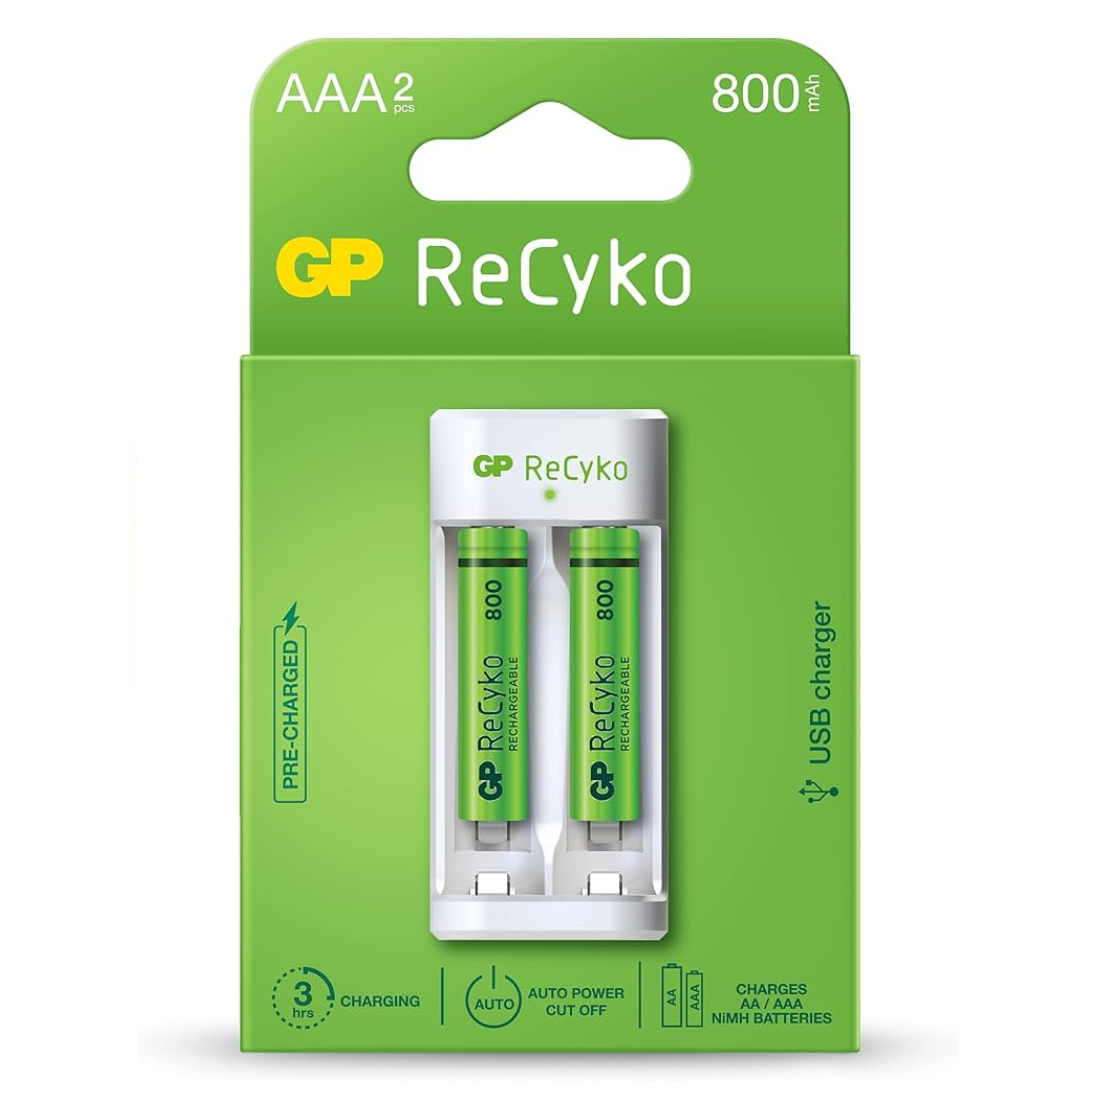 GP ReCyko USB Charger With 2 X 800mAh AAA Rechargeable Battery